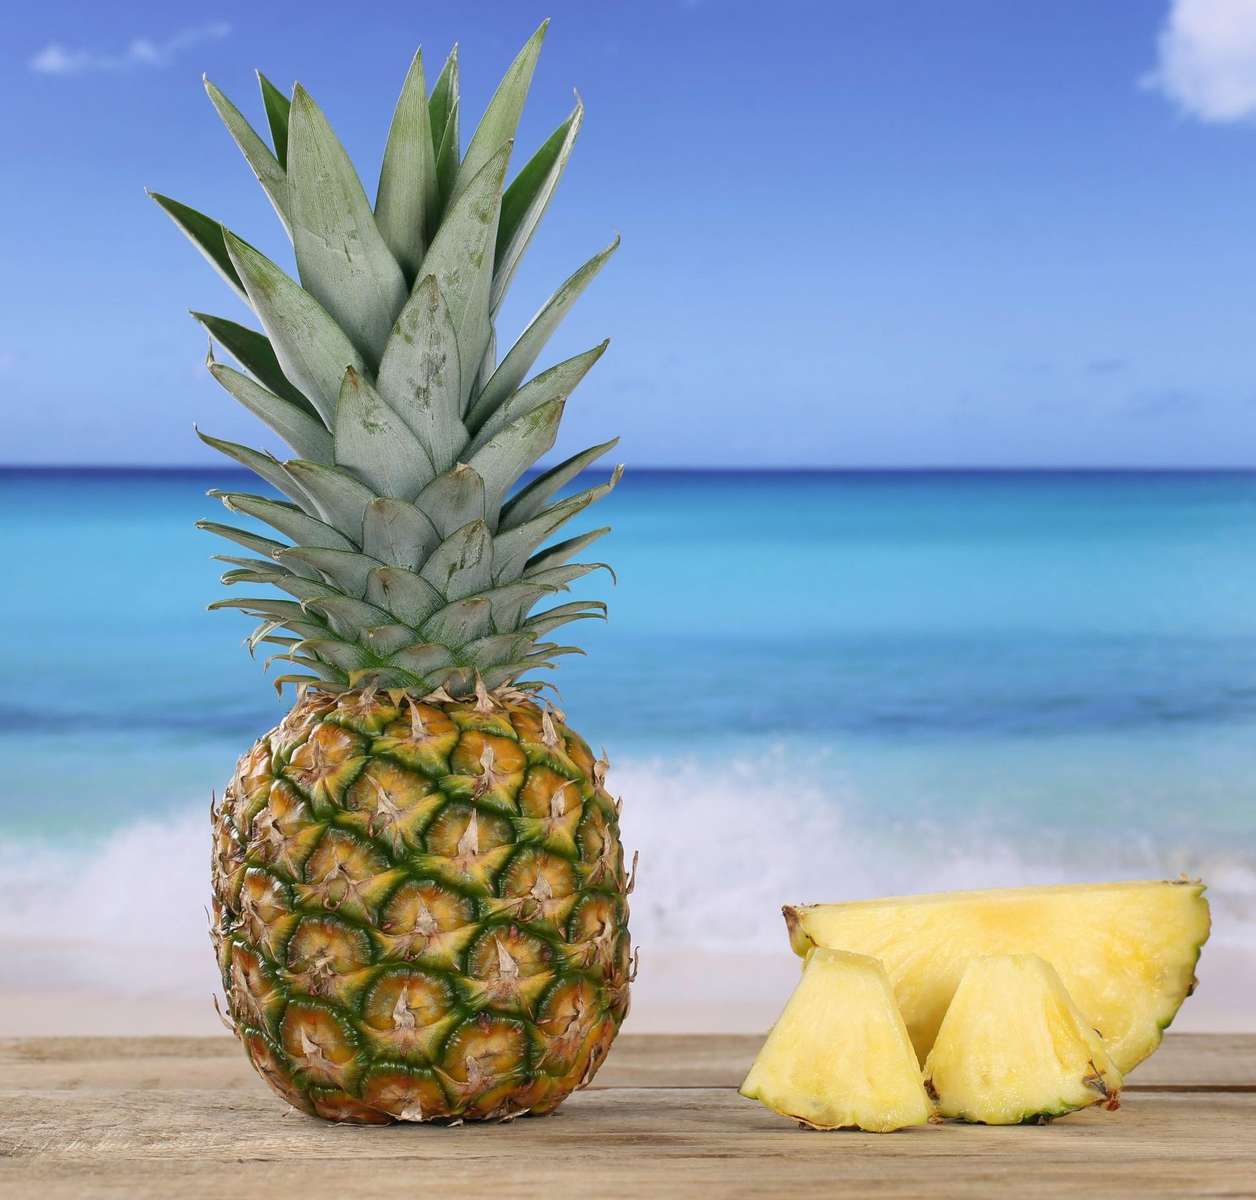 Mania dell'ananas puzzle online